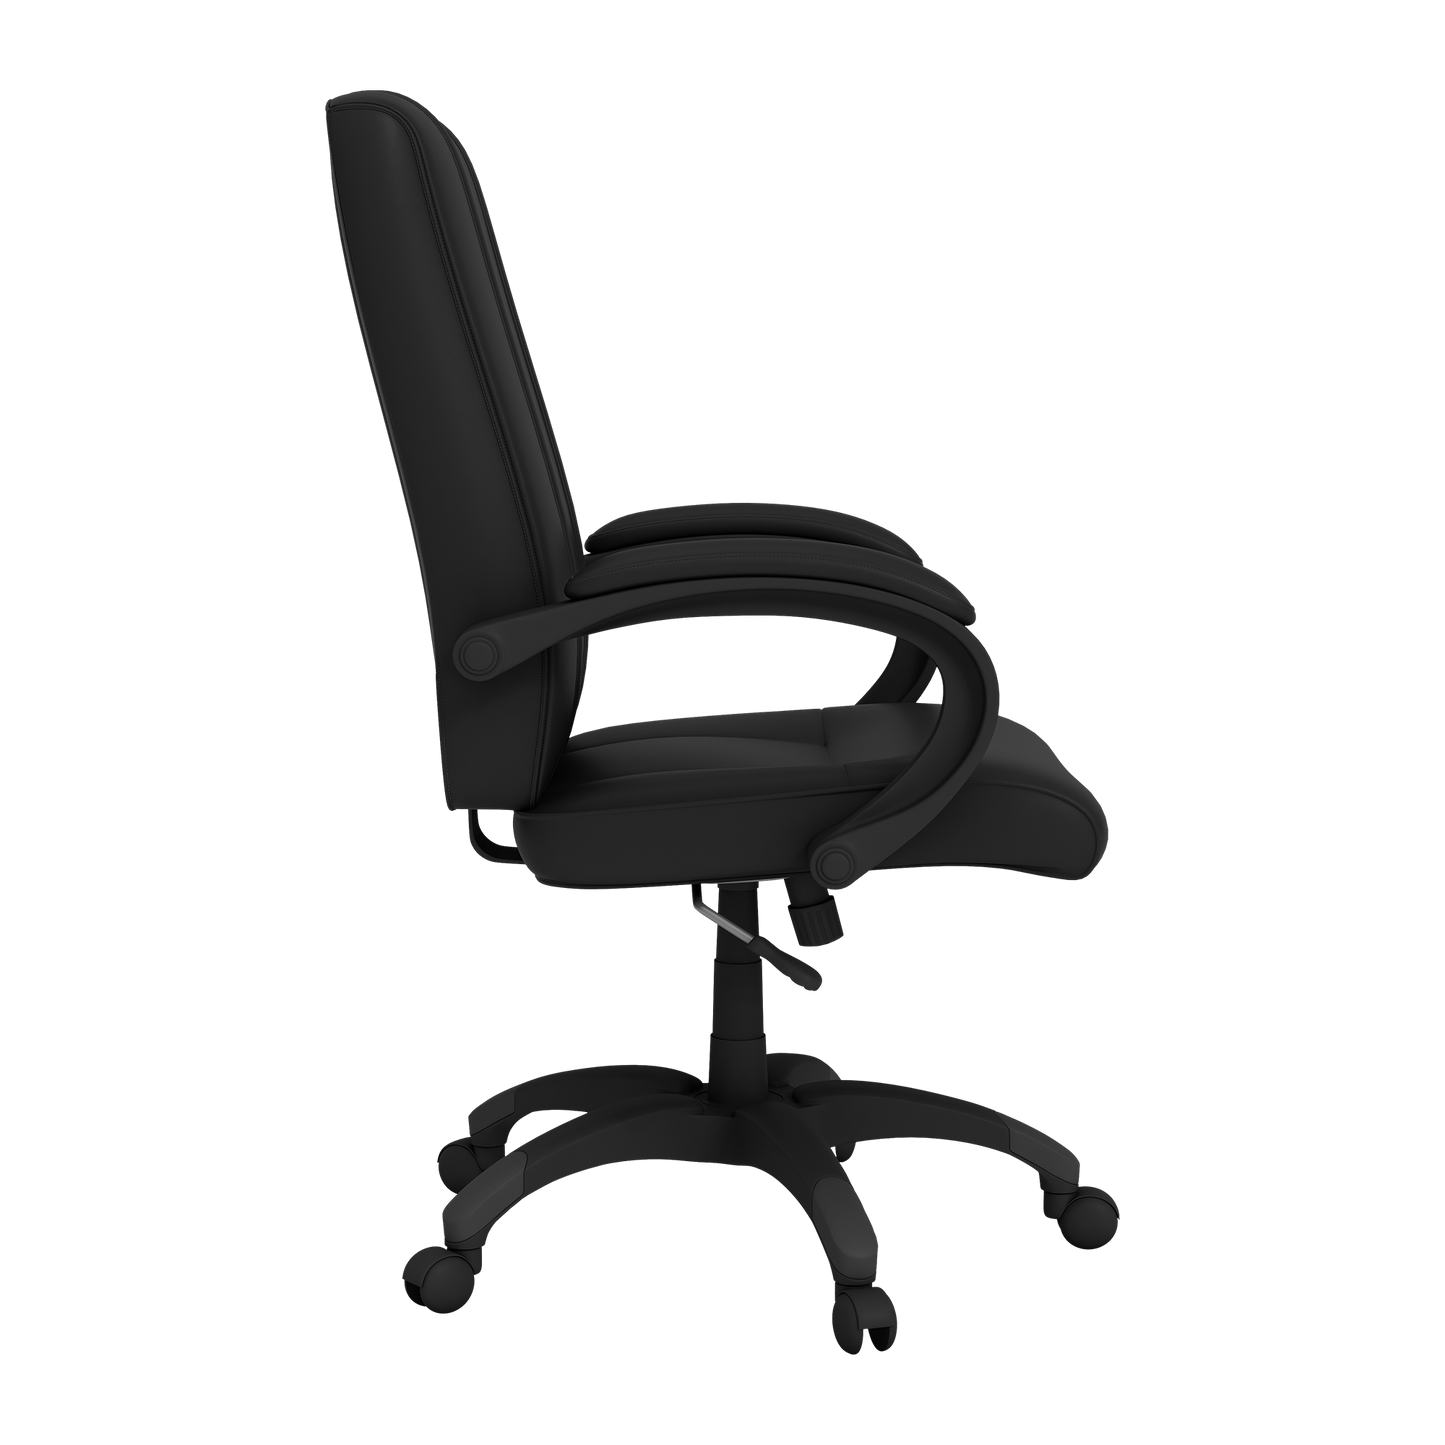 Office Chair 1000 with Philadelphia Phillies Secondary